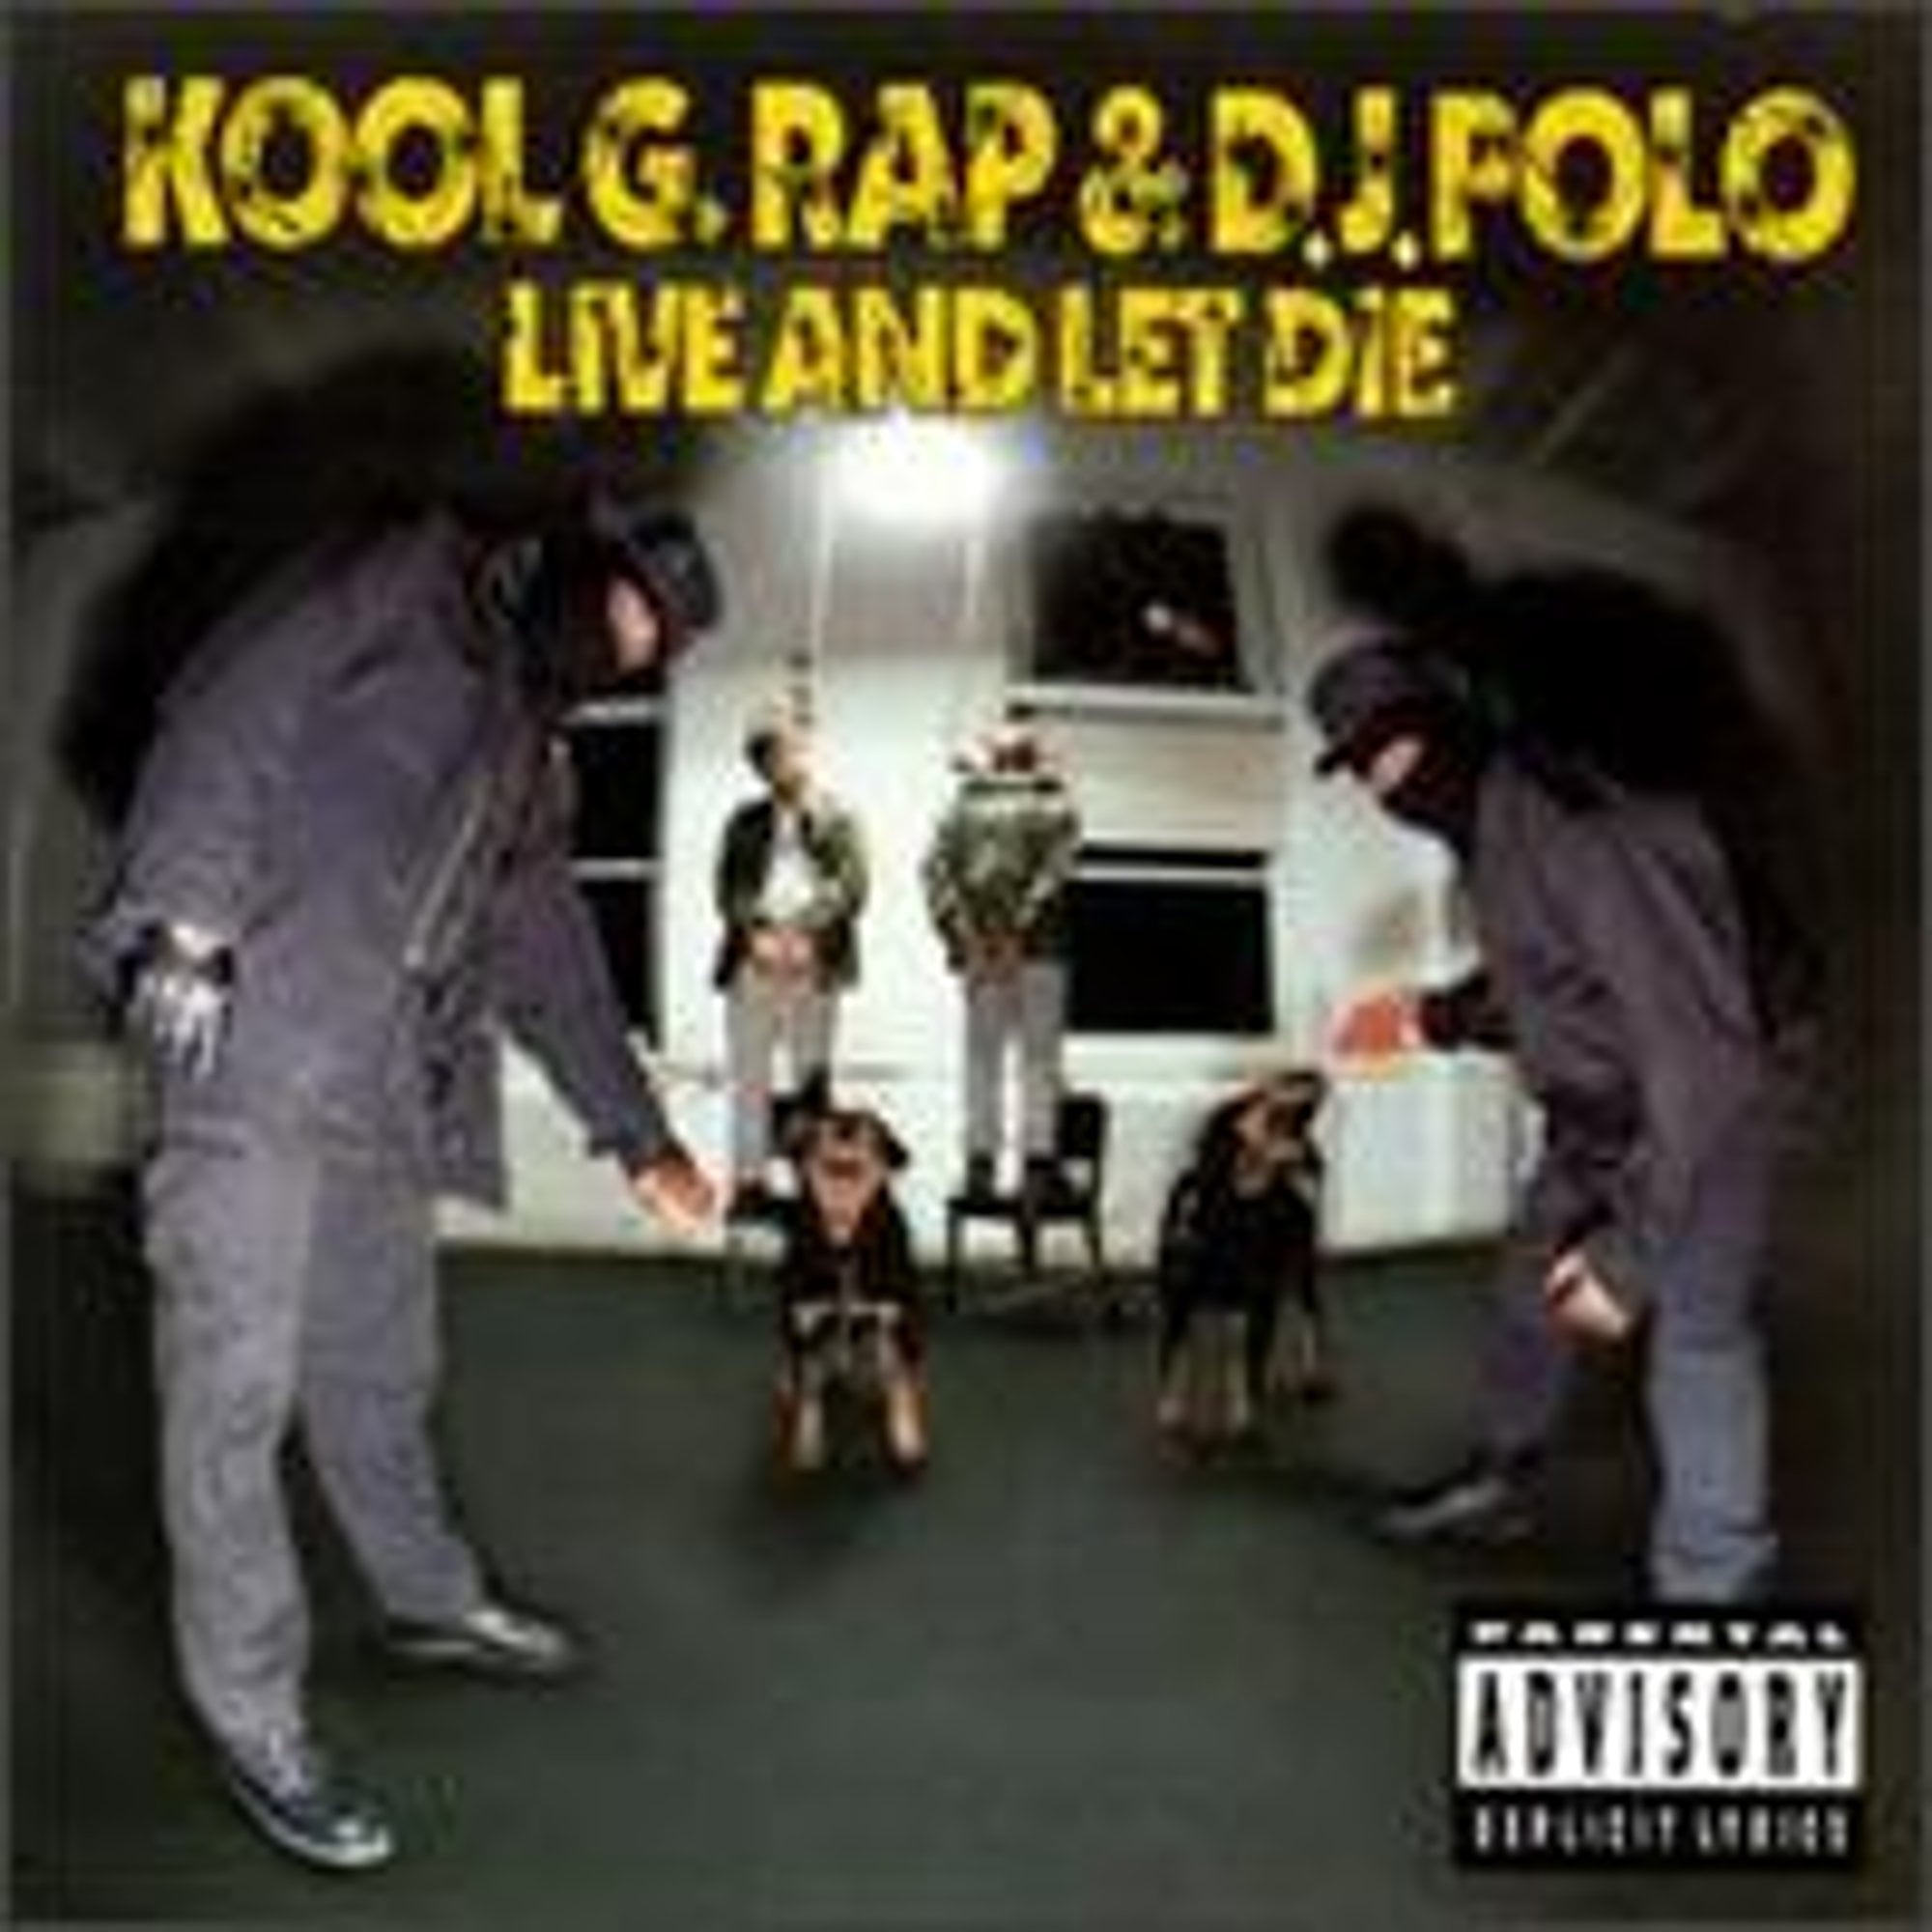 Live and Let Die (CD) by Kool G Rap & DJ Polo